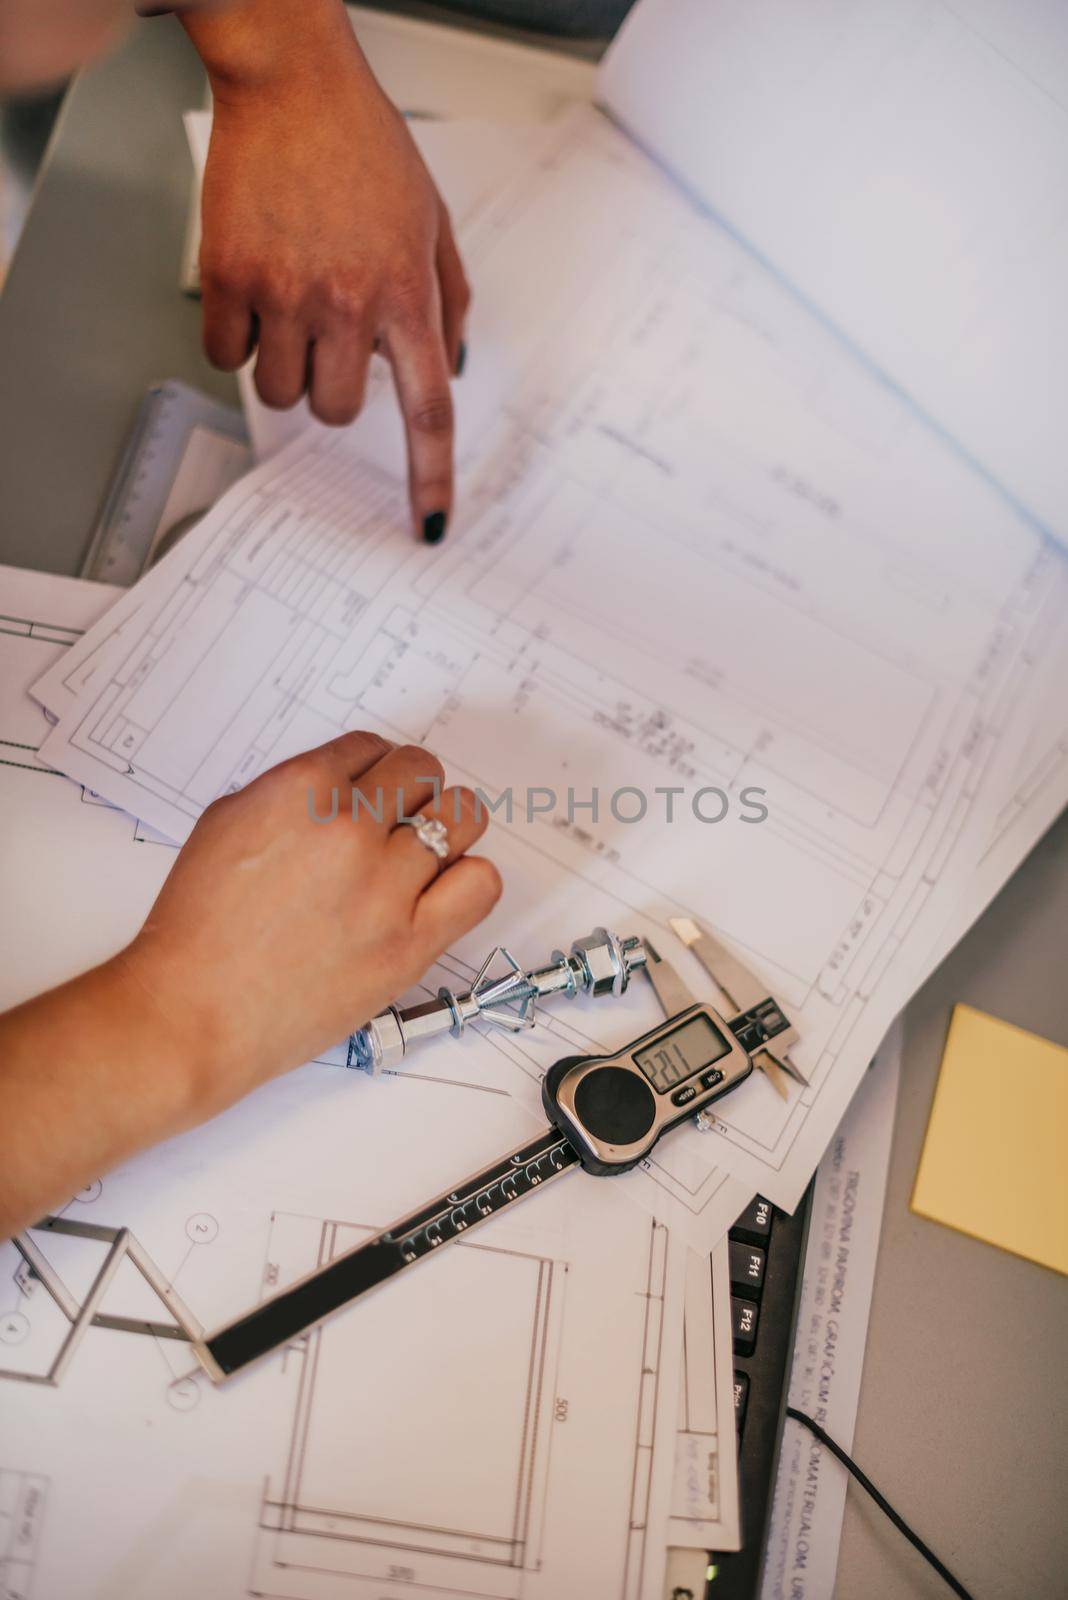 Engineer technician designing drawings mechanical parts engineering Engine.manufacturing factory Industry Industrial work project blueprints measuring bearings caliper tools. High quality photo